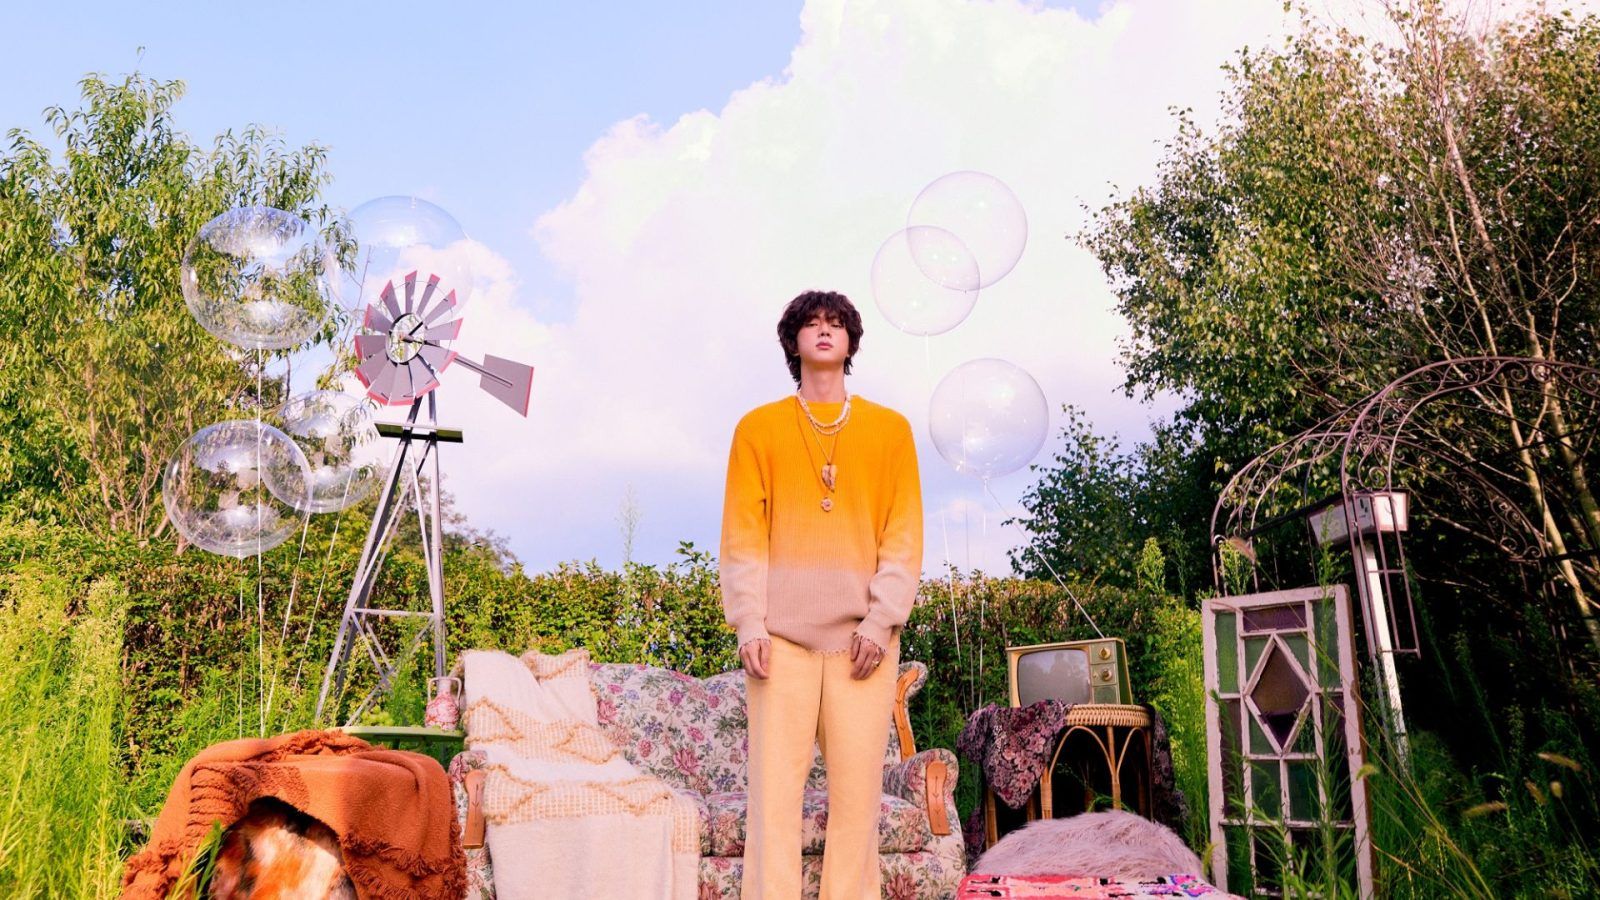 BTS' Jin finally launches his debut solo single 'The Astronaut'